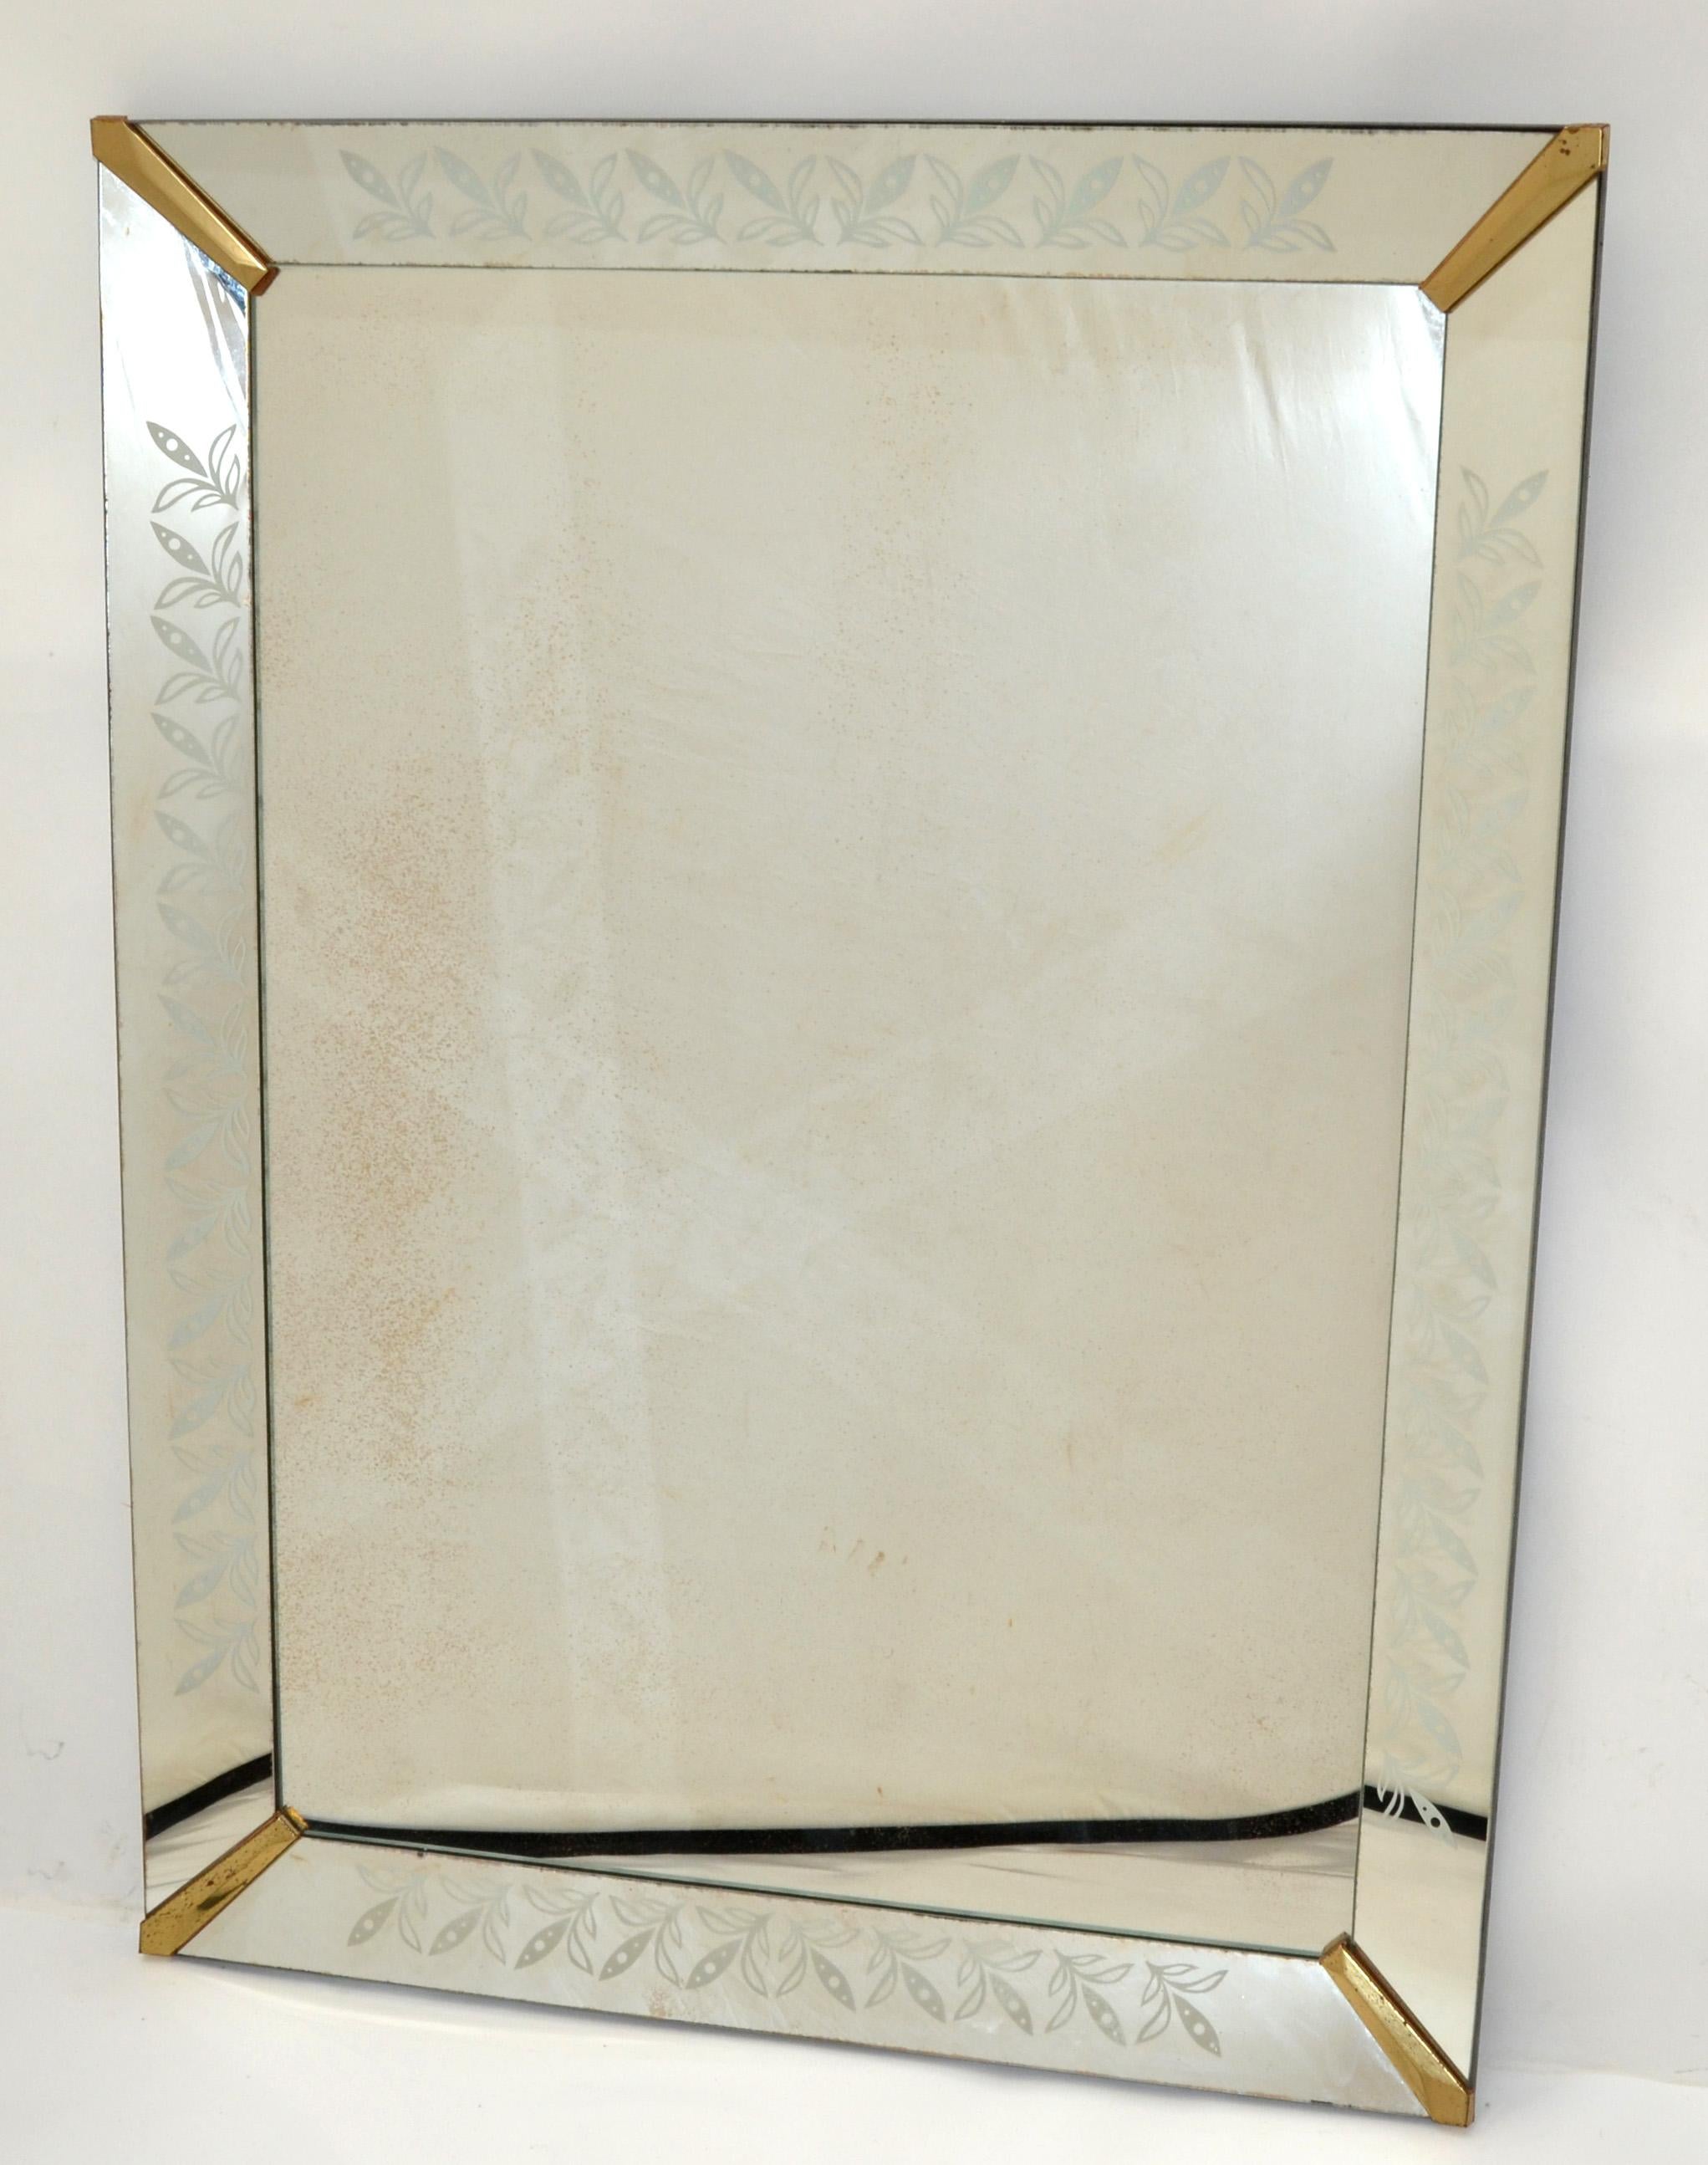 Decorative 1940s Venetian style mirror with beveled glass frame and brass finished metal corners. 
The wave Glass panels are etched with a flower decor.
The mirror has a very heavy solid wood backing in black finish.
Can be hung vertically or